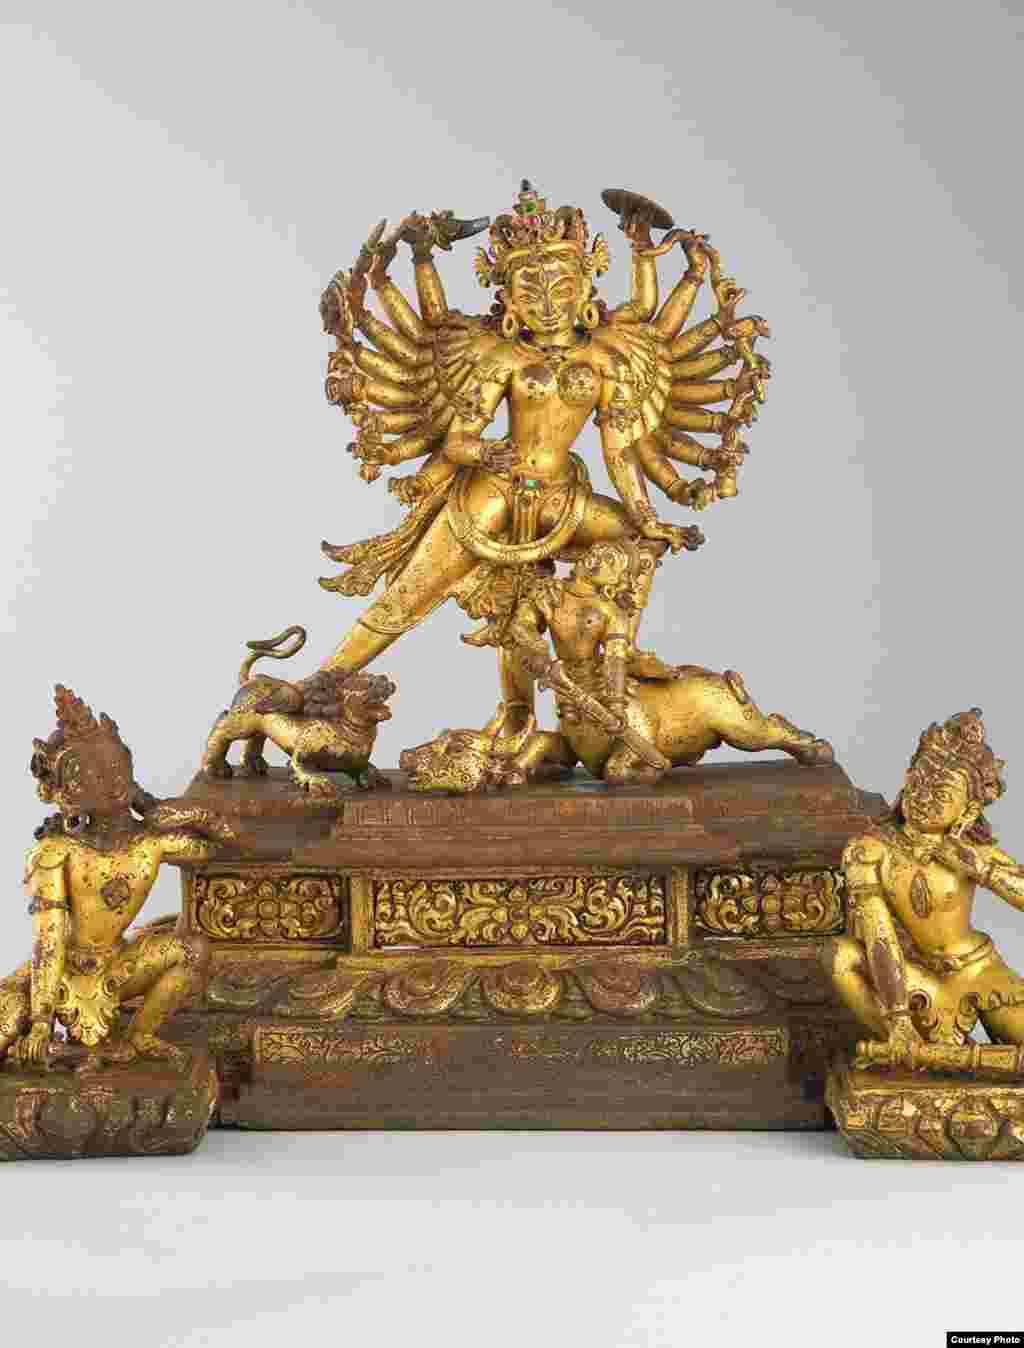 The Hindu goddess Durga assembles weapons of all the gods, overcoming the demigod Mahisha, who endangered the order of the world. Her moment of victory is represented in this copper alloy artwork. (Rubin Museum of Art)